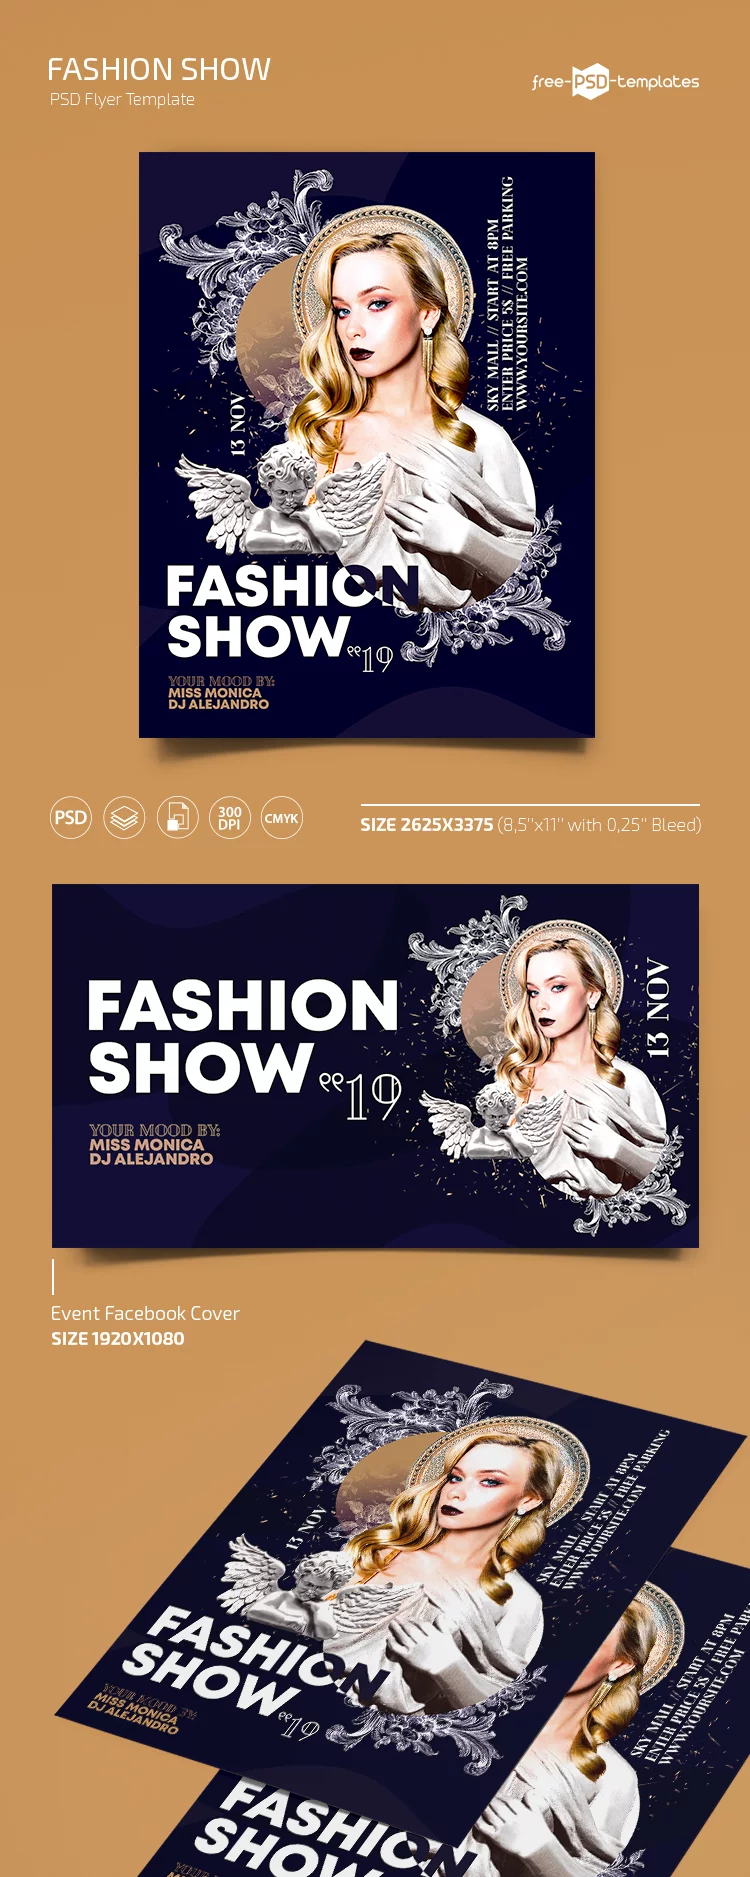 Free Fashion Show Flyer Template in PSD